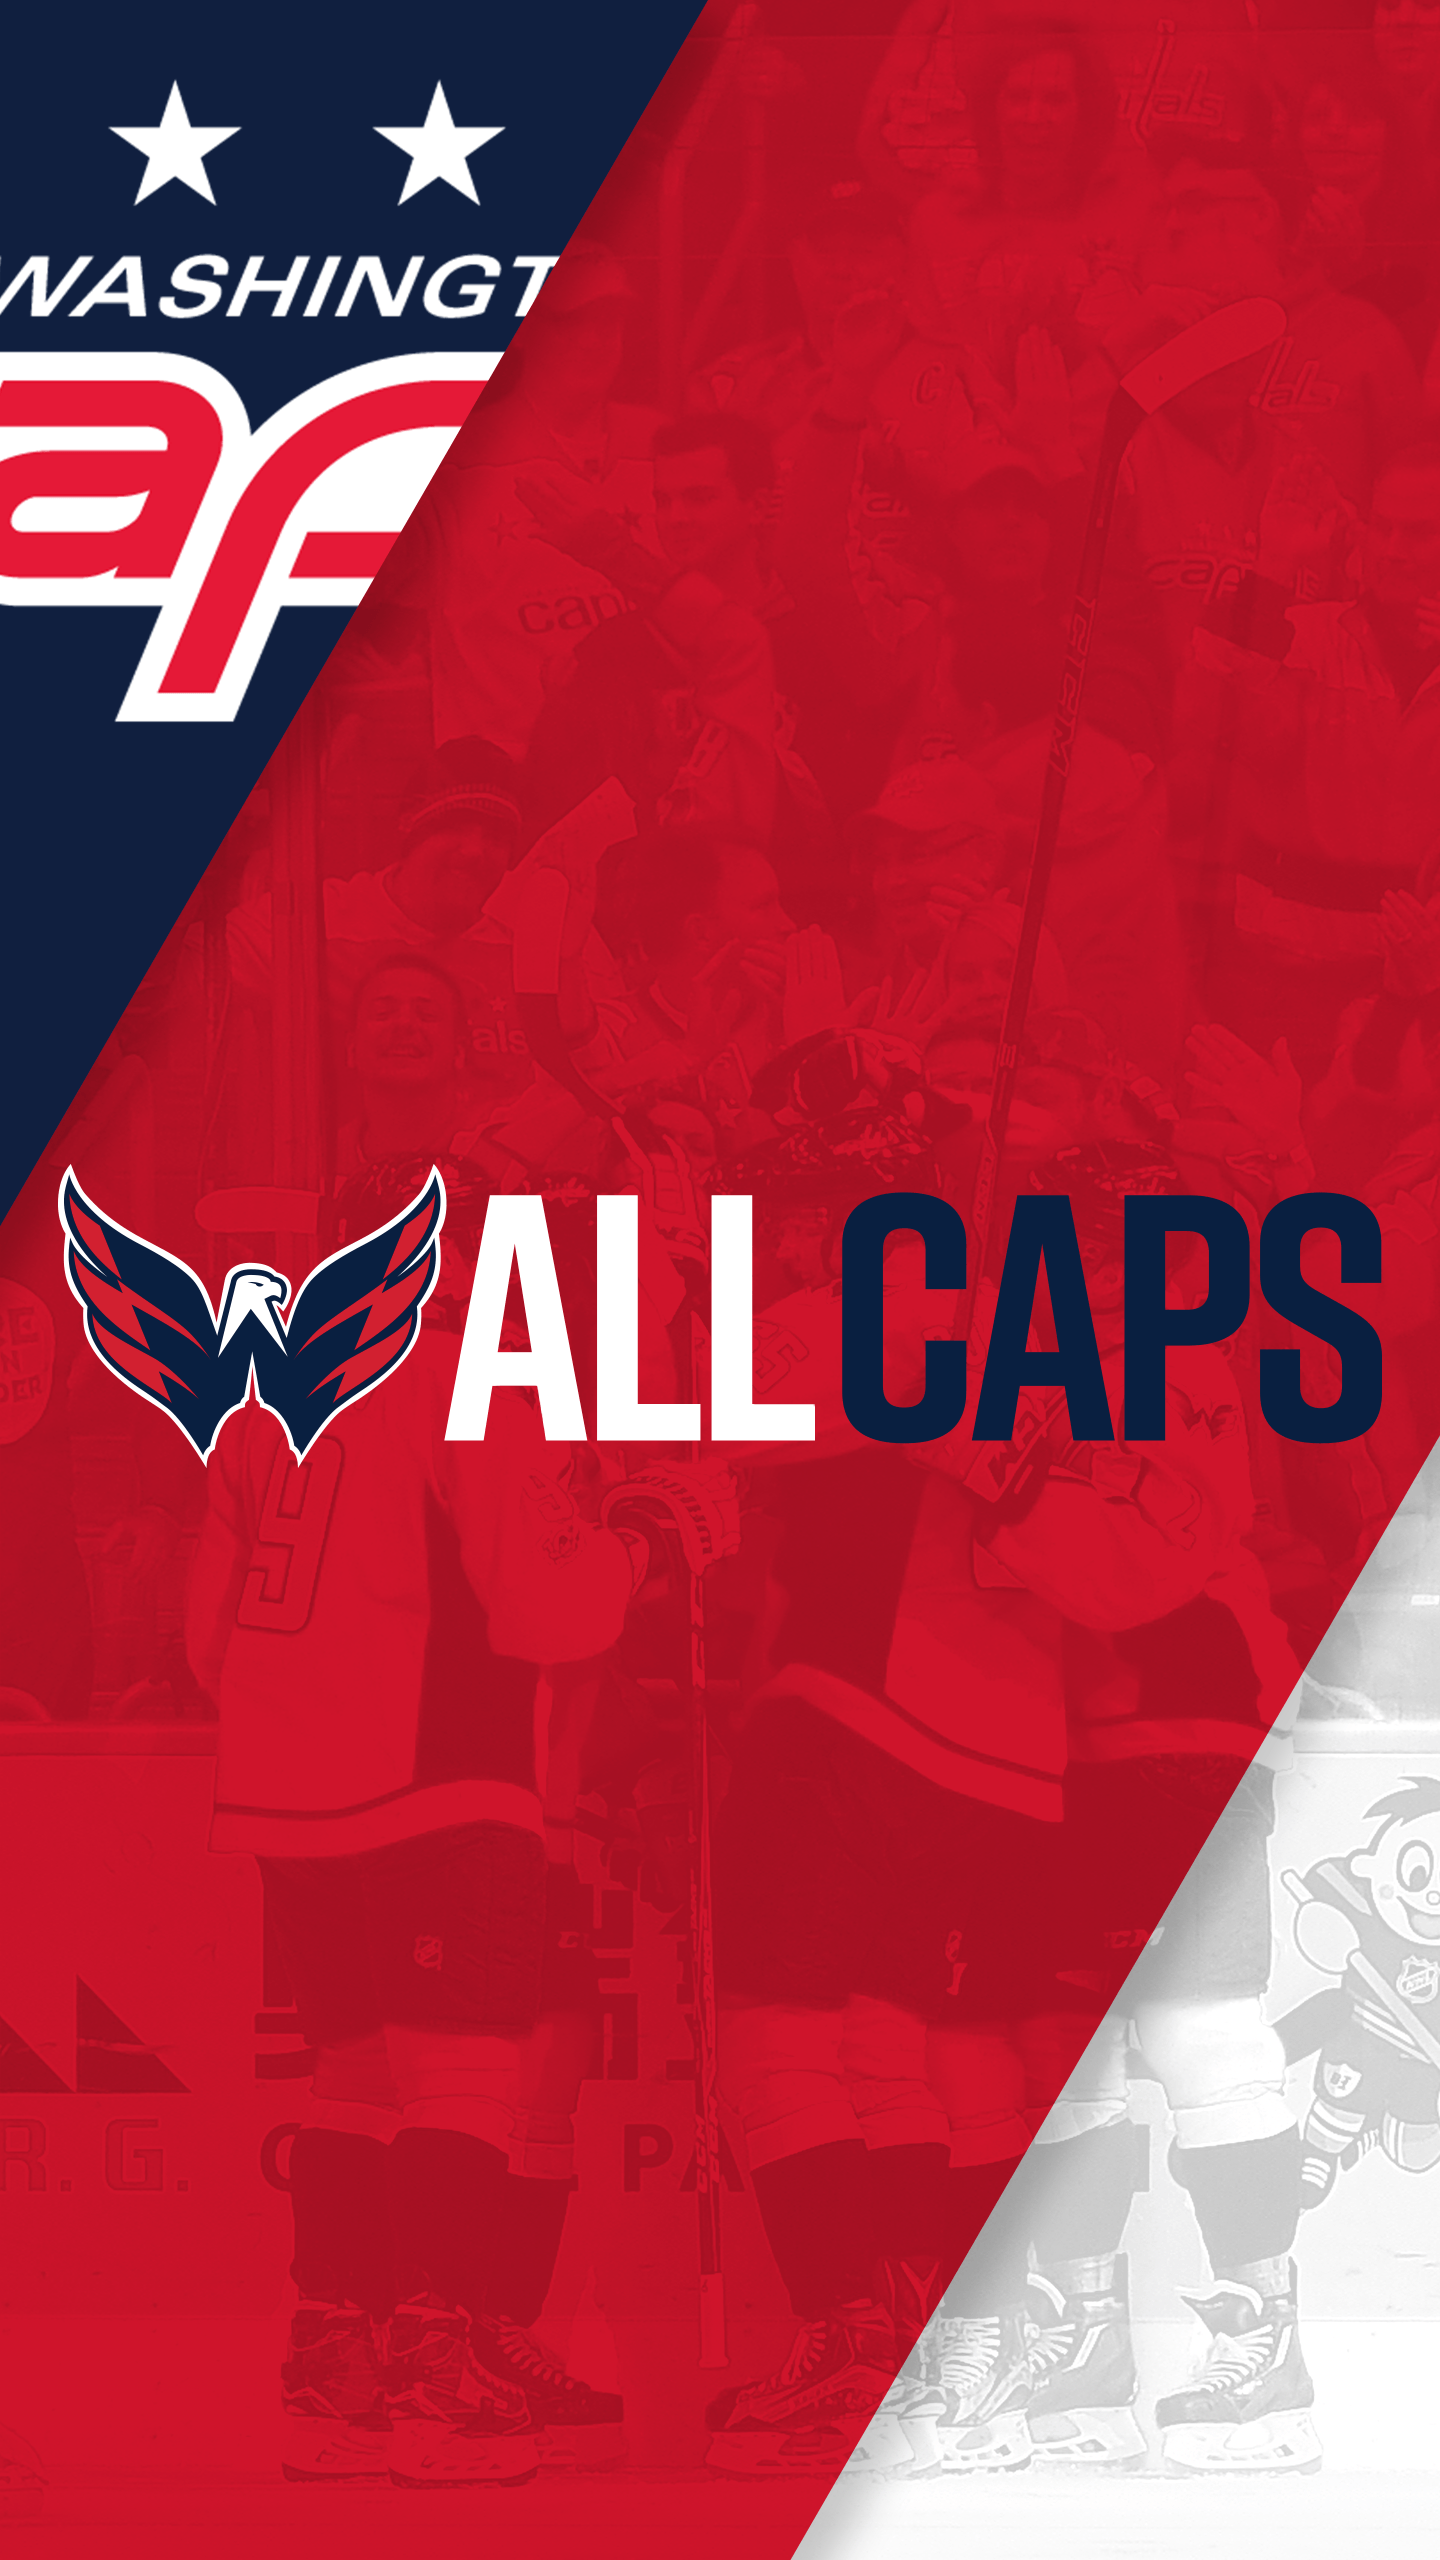 OC] Capitals Stanley Cup Phone Wallpapers : r/caps